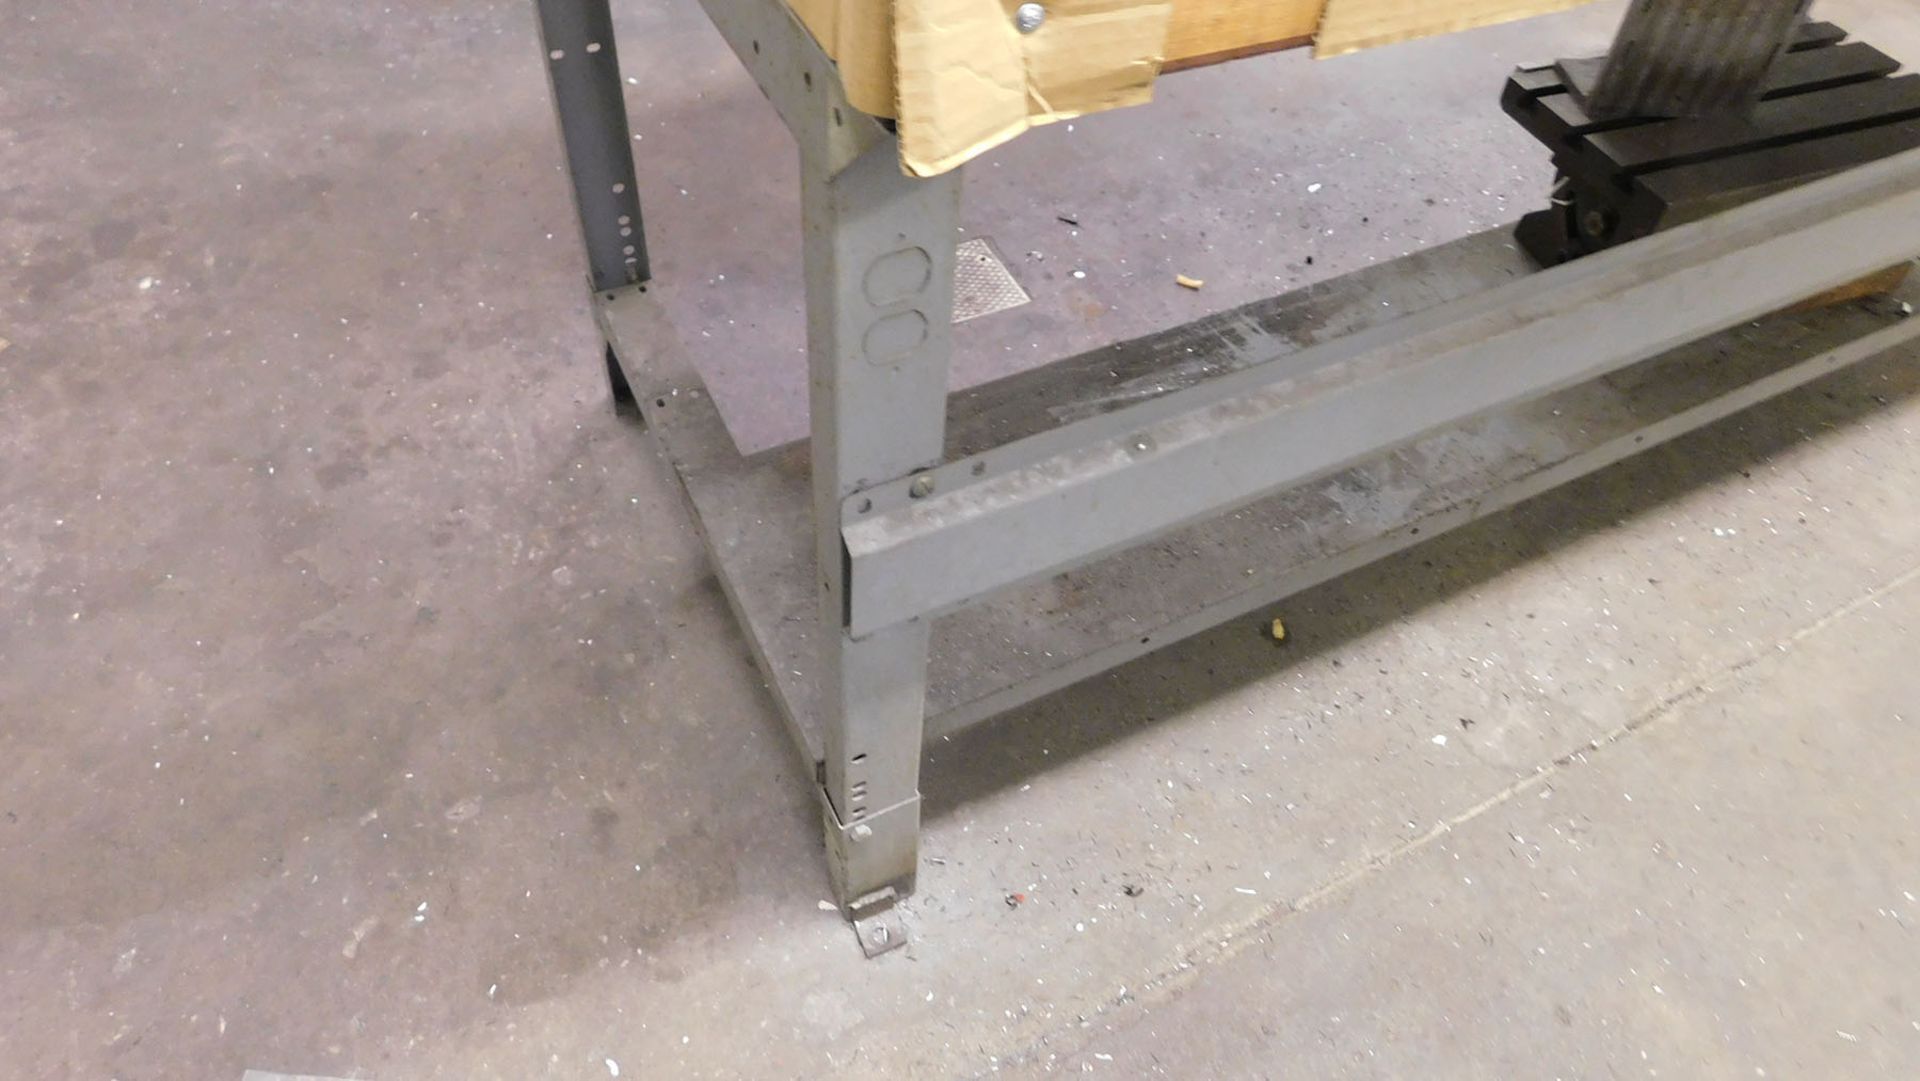 6' X 3' STEEL WORK TABLE WITH COLUMBIAN A 3 1/2 VISE - Image 3 of 3